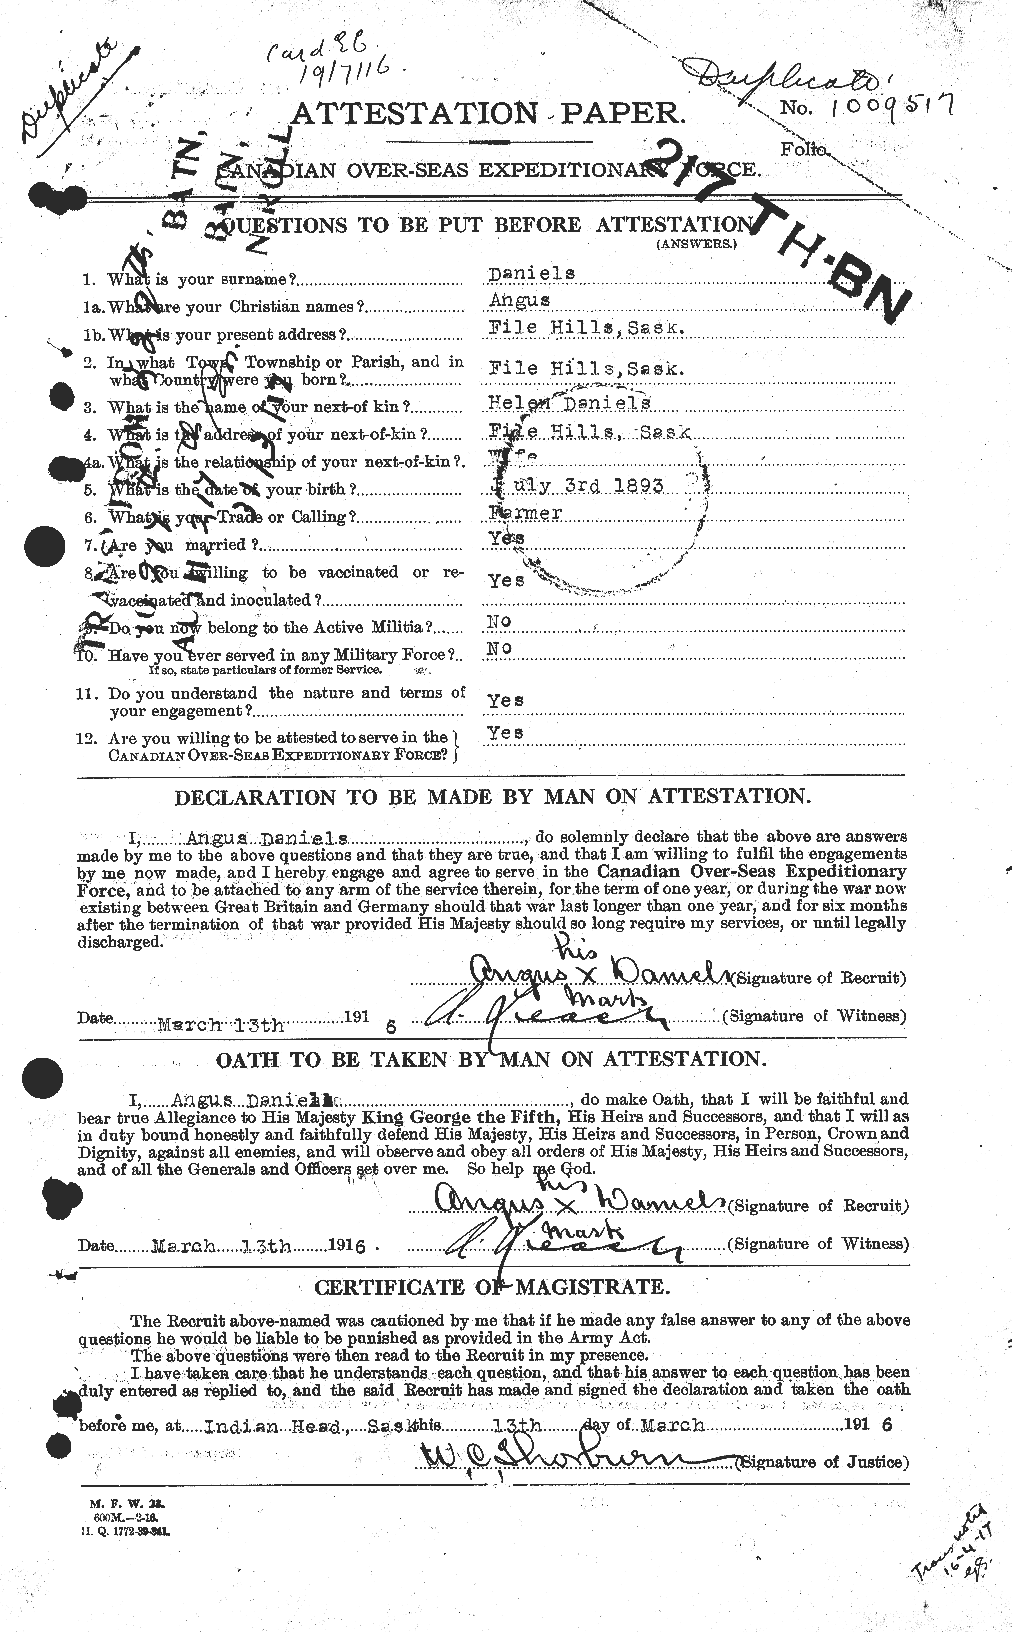 Personnel Records of the First World War - CEF 279566a